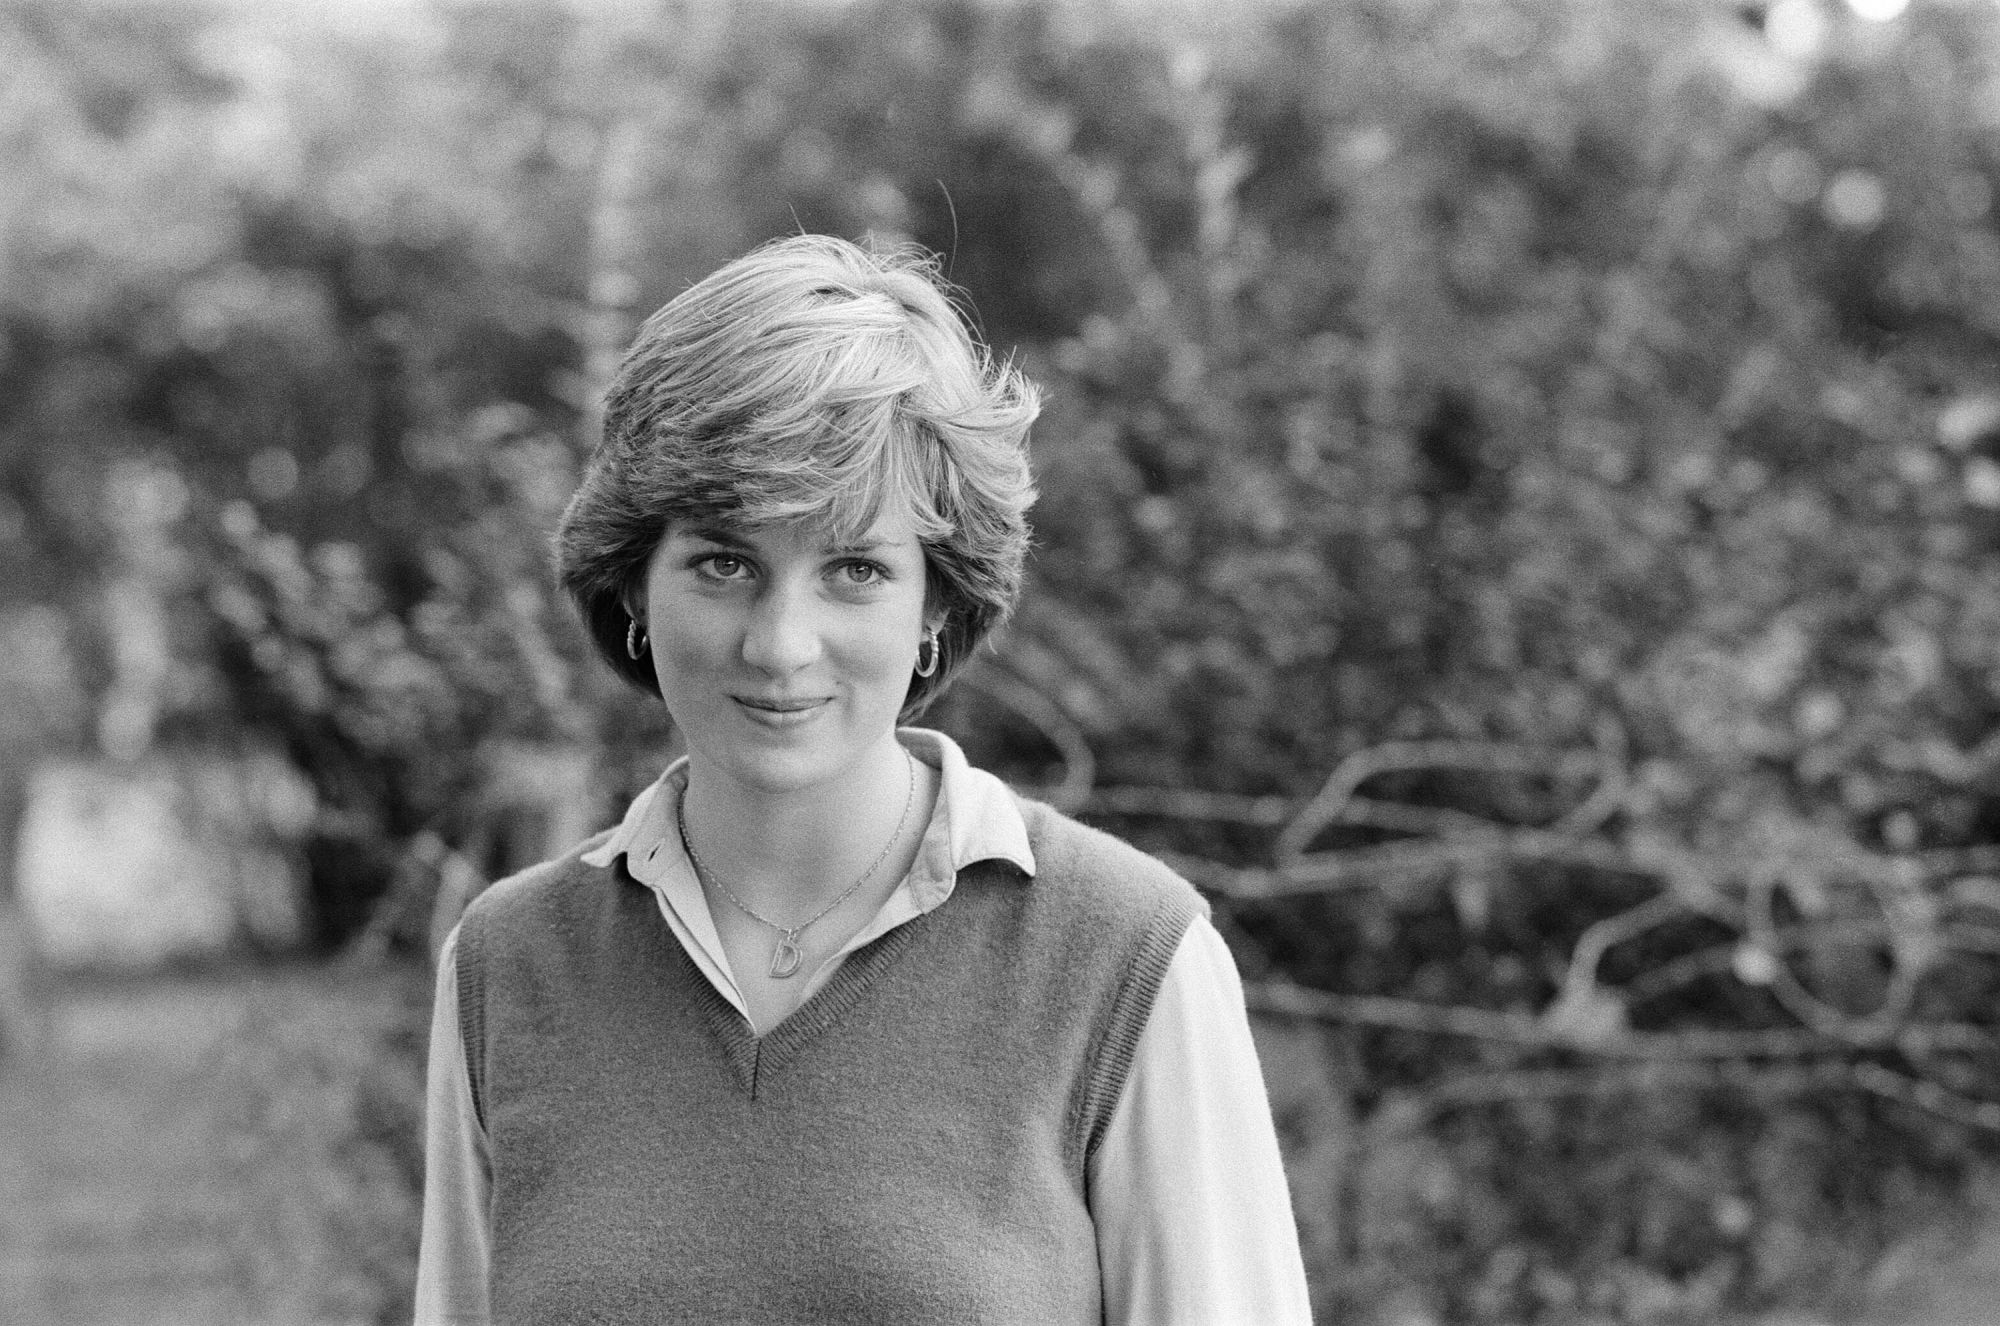 Lady Diana Spencer, later to become Princess Diana, Princess of Wales, pictured at the kindergarten where she worked as a teacher, in September 1980